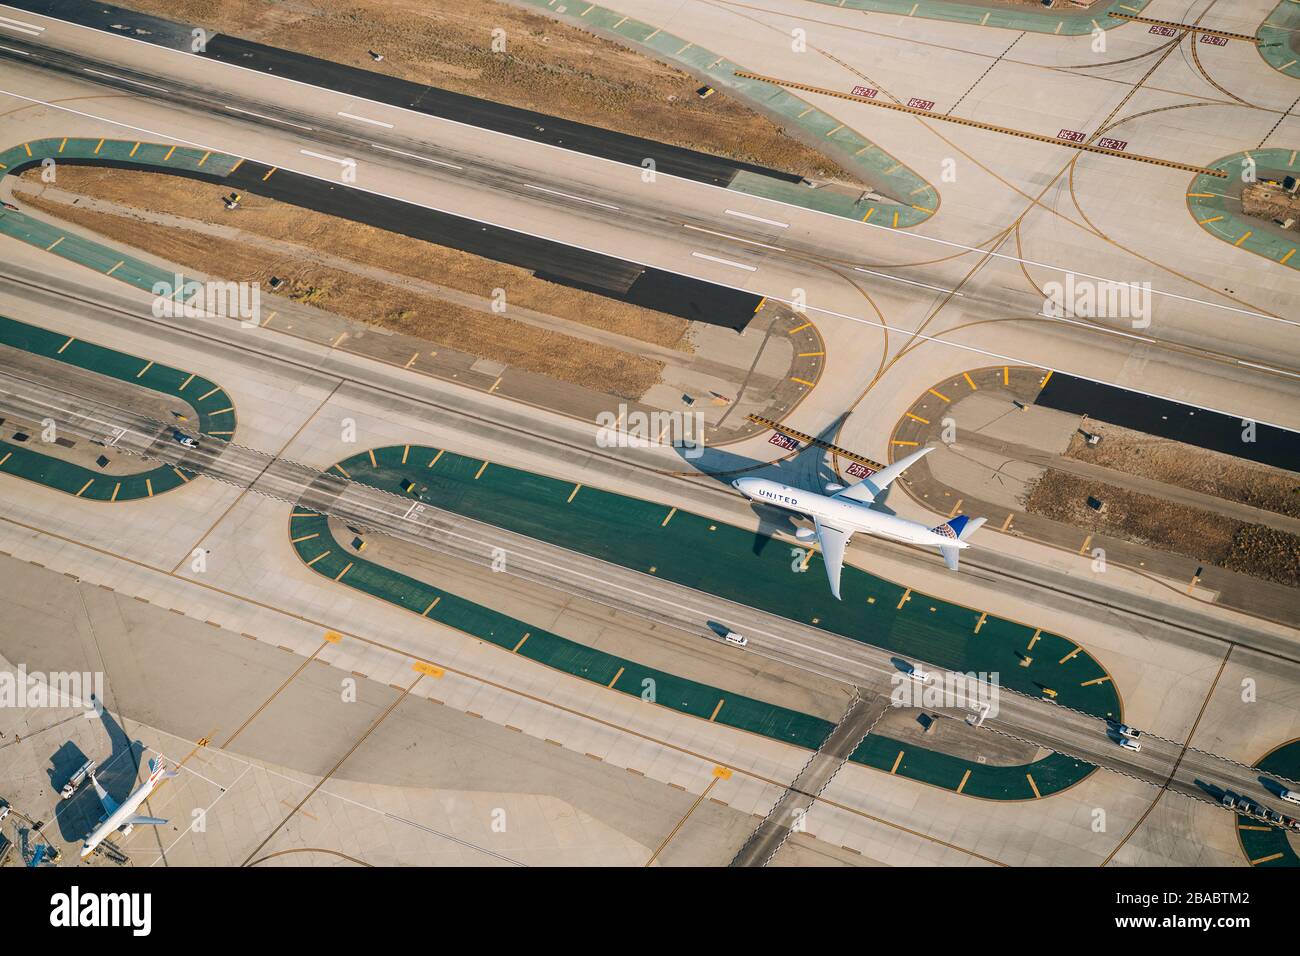 Aerial view of airplane landing at LAX airport, Los Angeles, California, USA Stock Photo